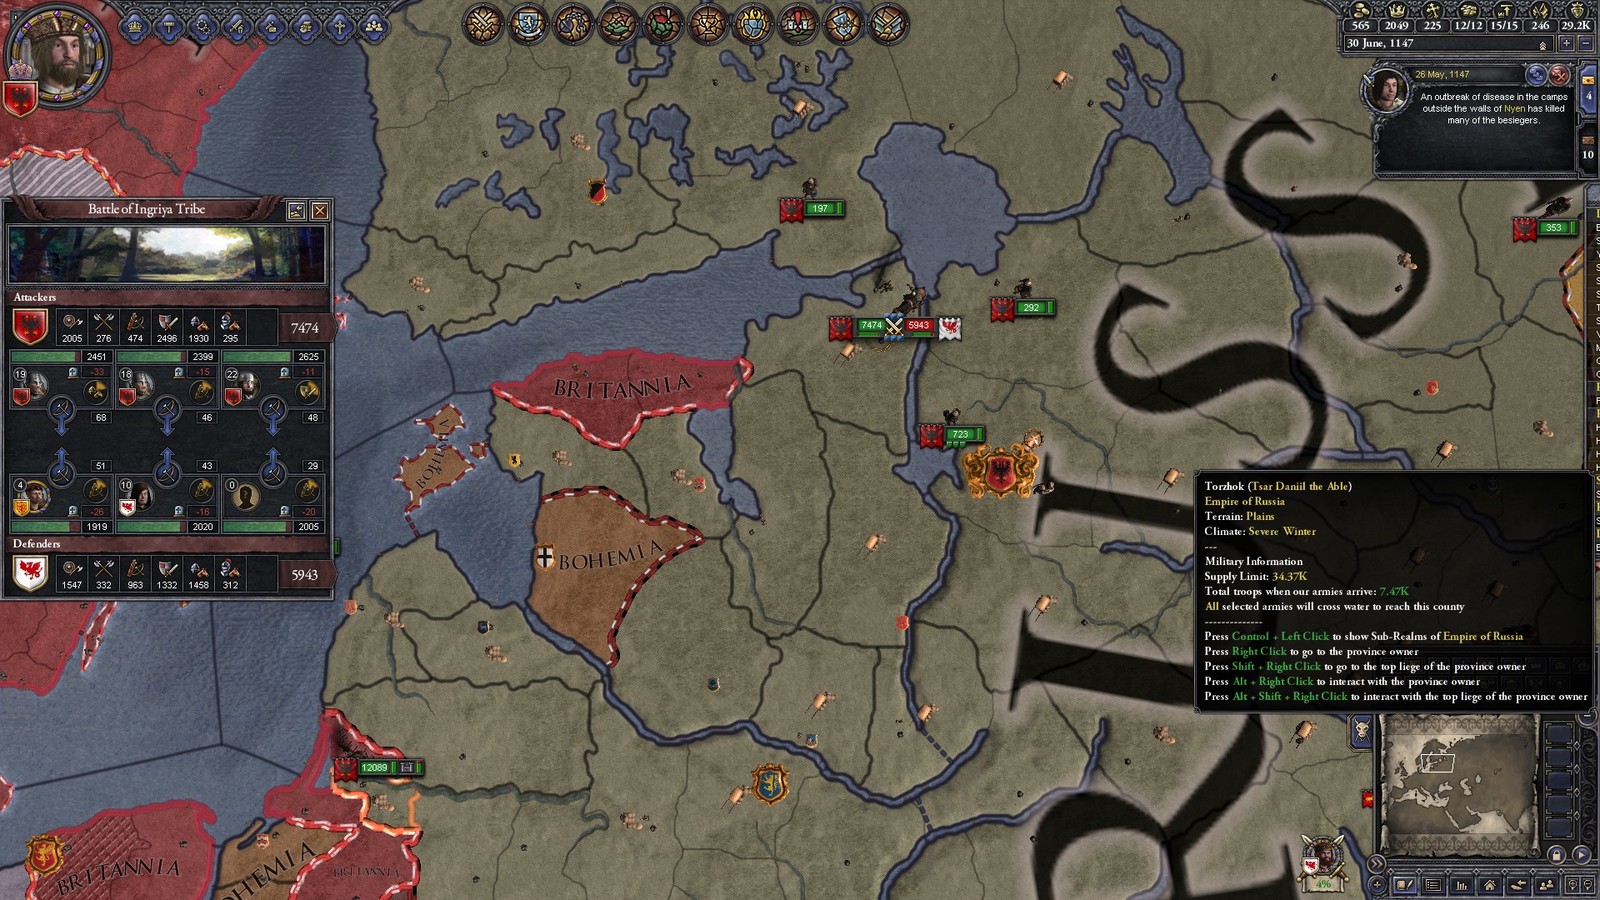 Crusader kings 3 after the end. Crusader Kings 2 after the end.